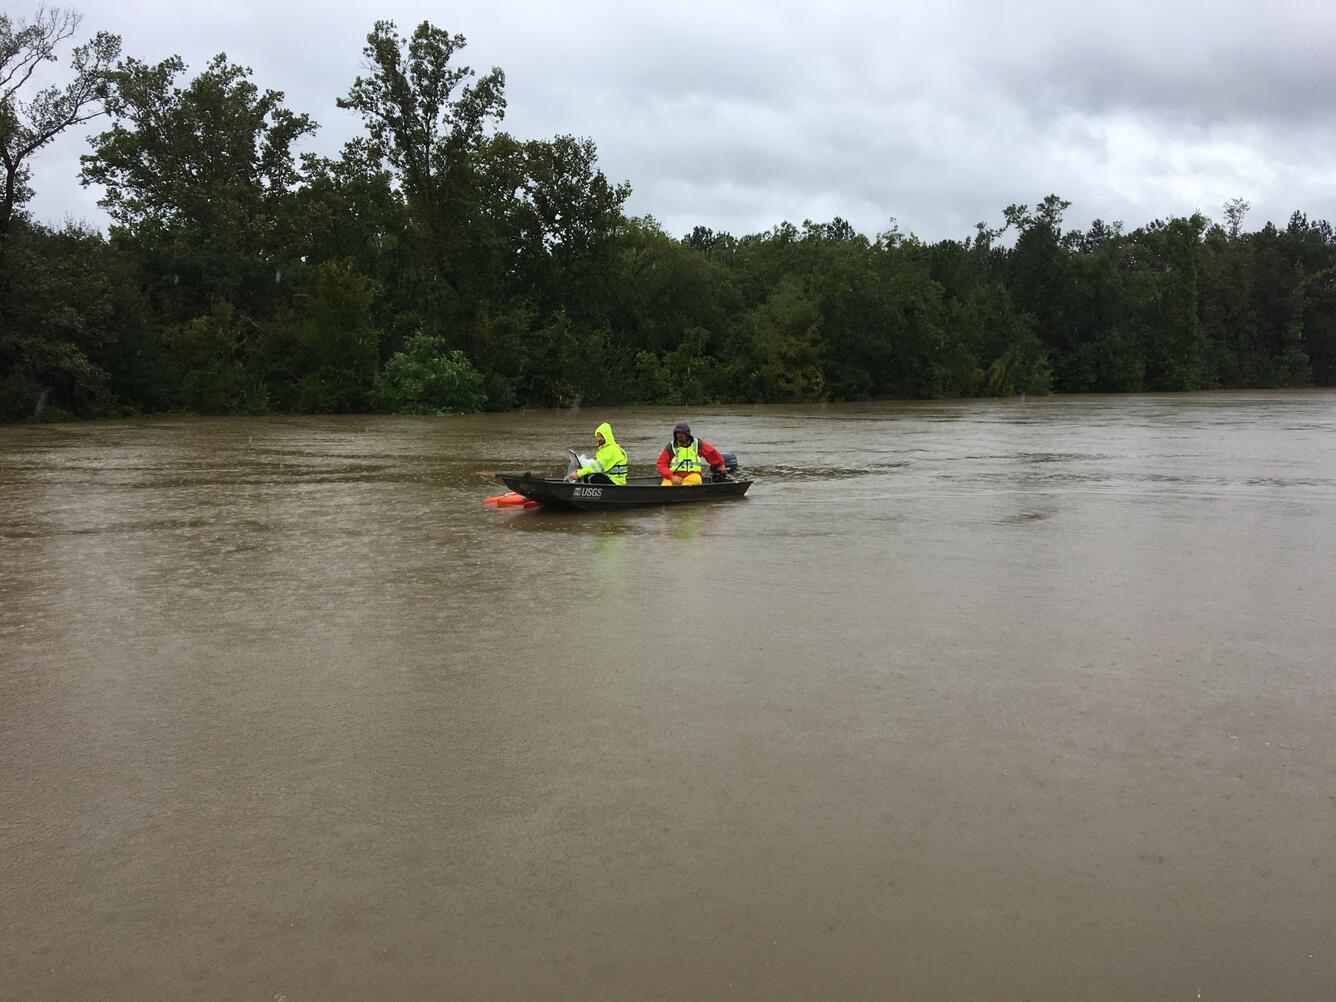 Two USGS technicians boating along a flooded river